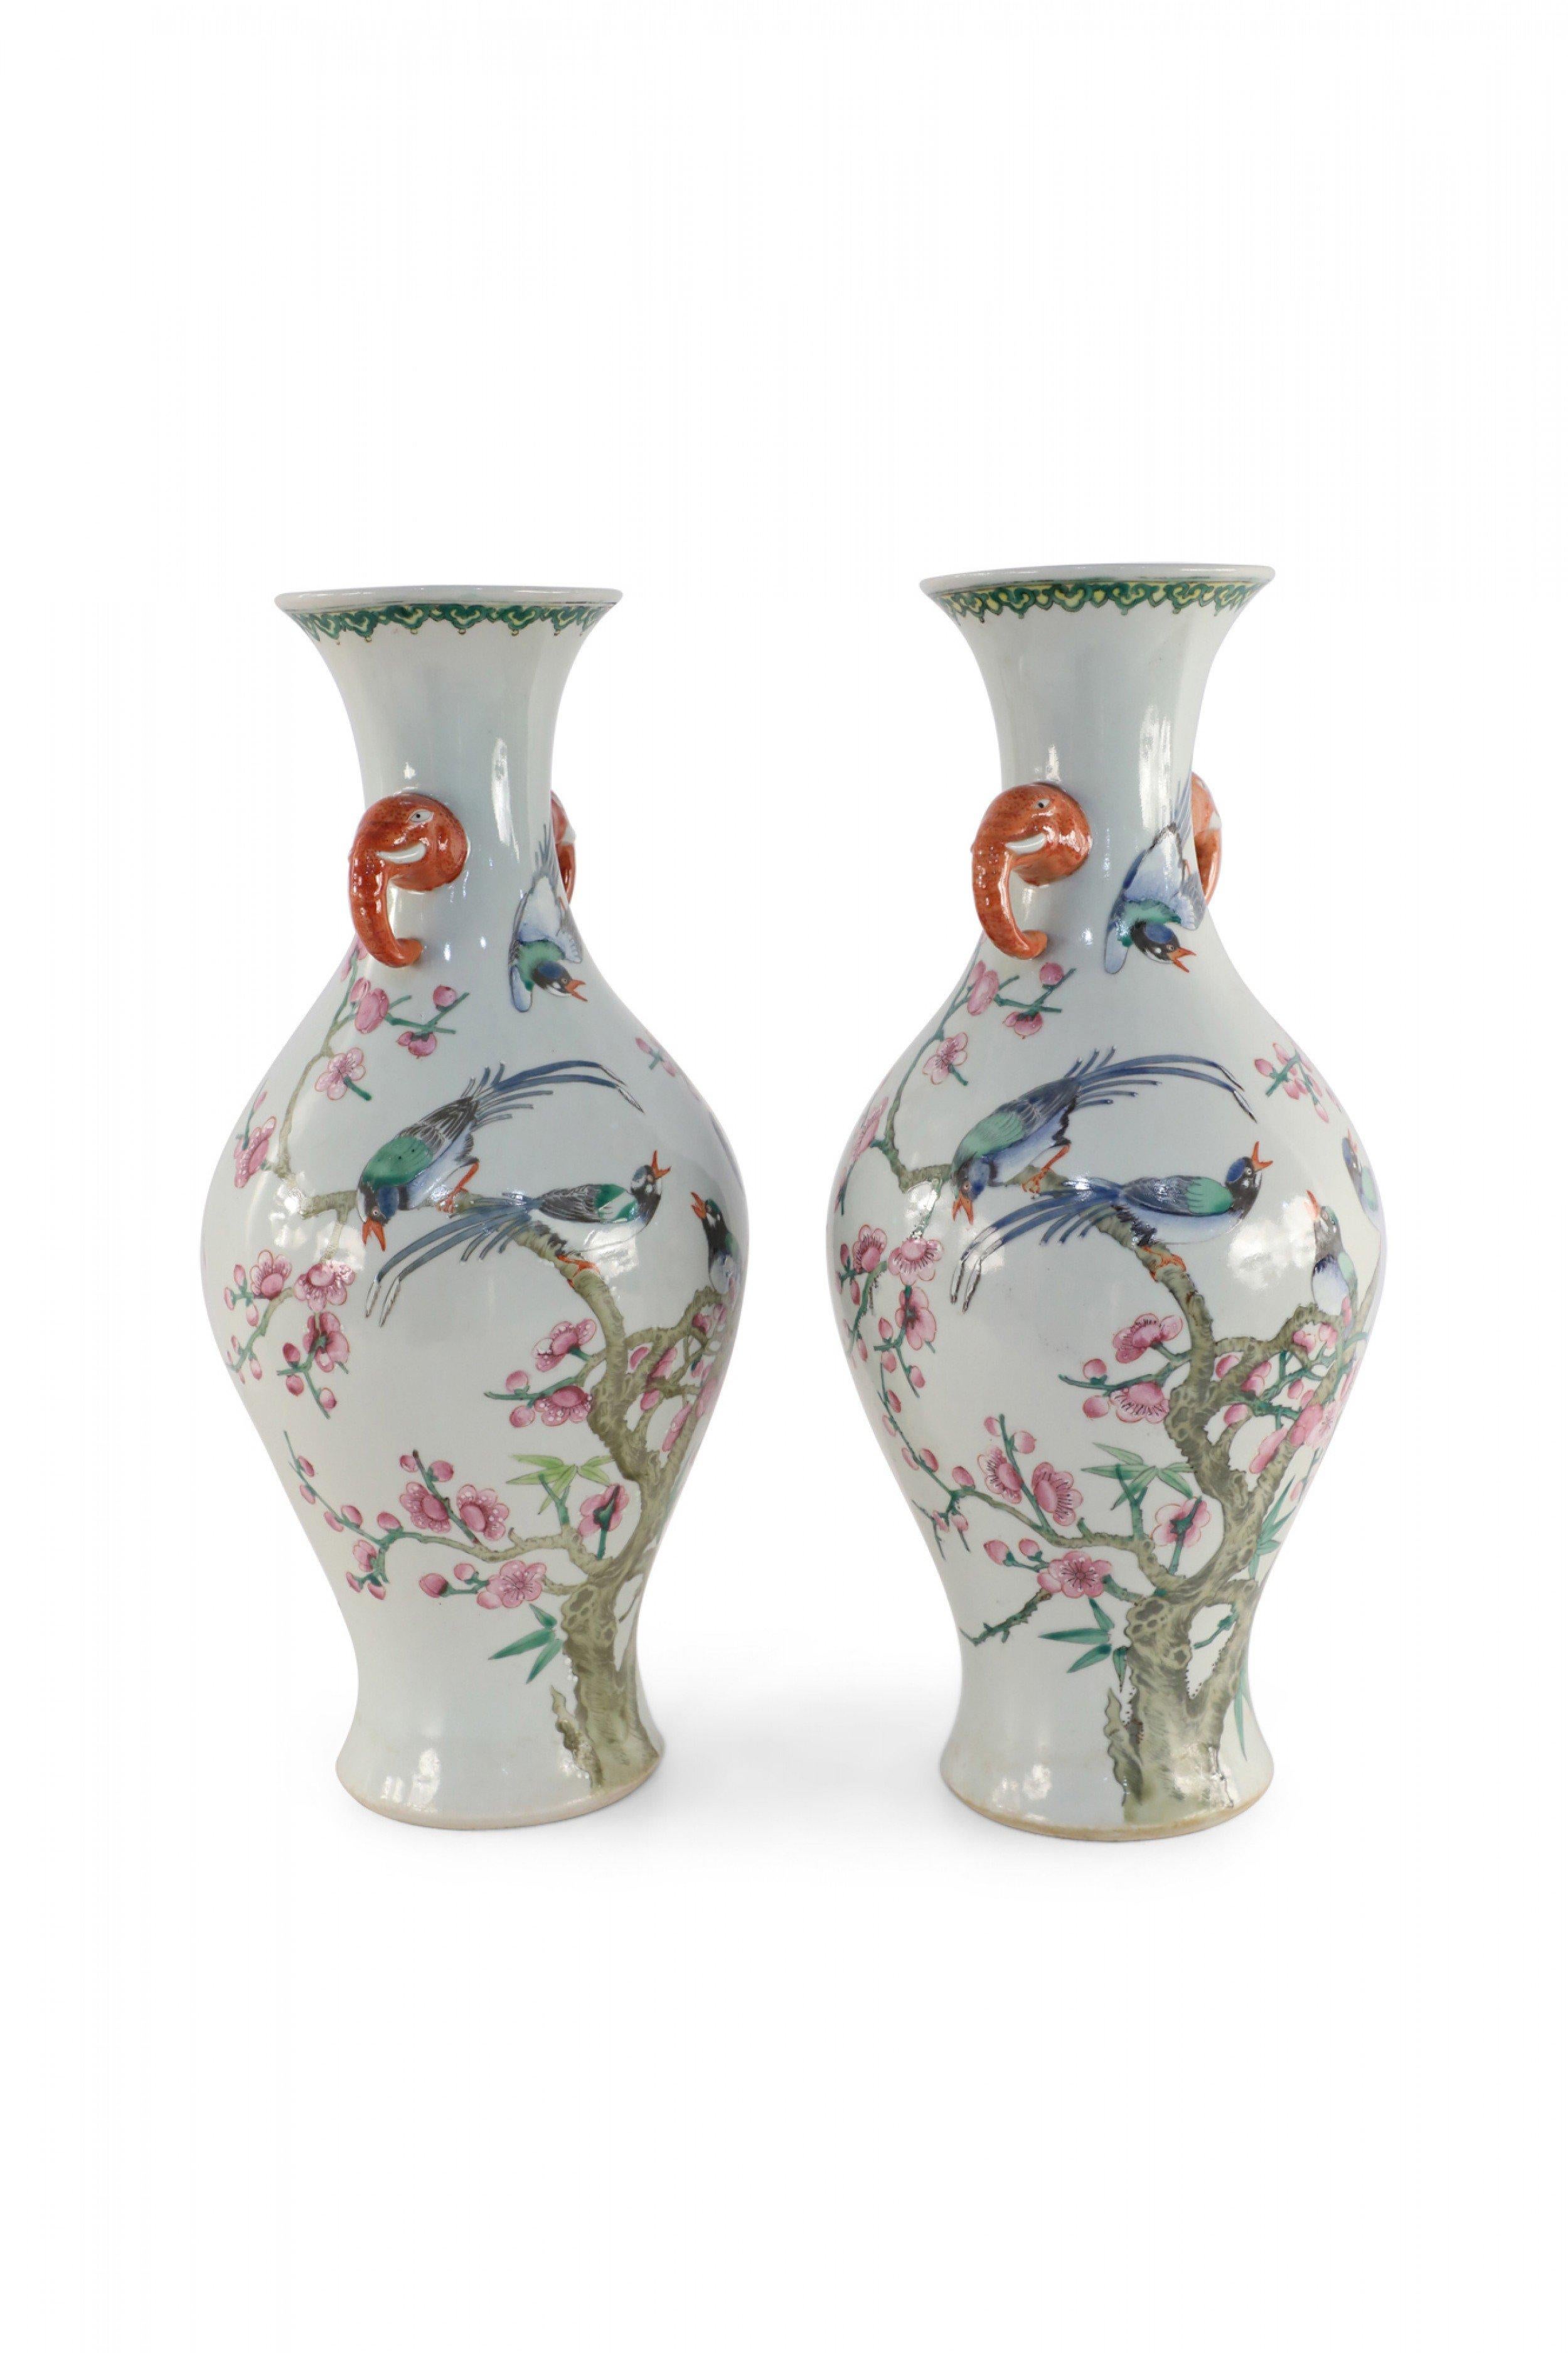 Pair of Chinese off-white urn-shaped porcelain vases depicting groups of birds perched on flowering branches of cherry blossom trees and one bird flying above, positioned between two orange, elephant handles that adorn the necks (priced as pair).
  